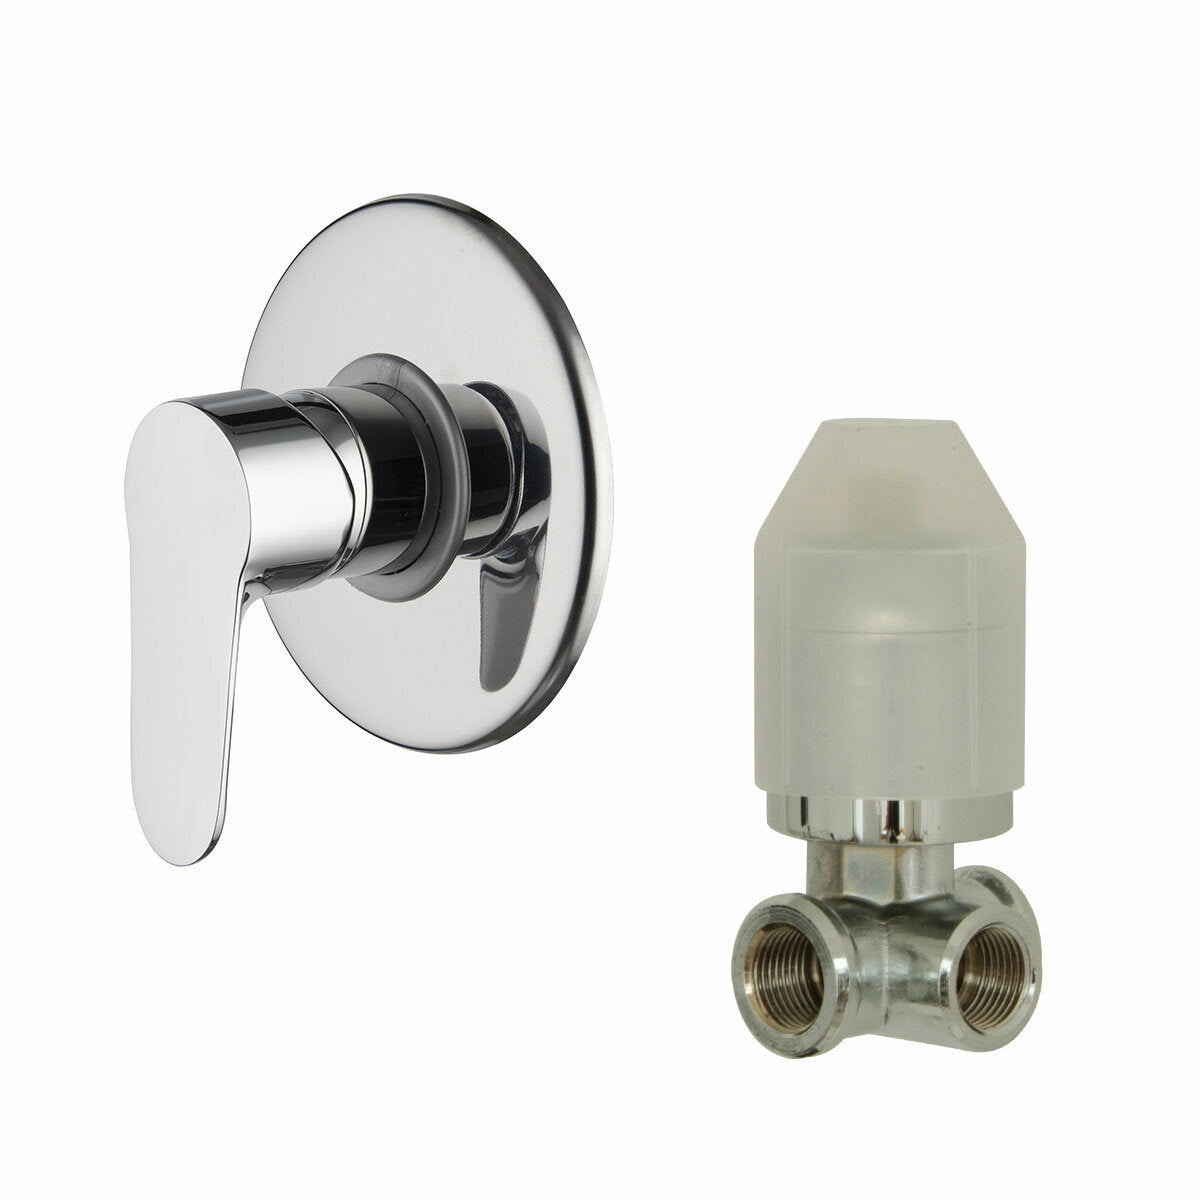 Fima Carlo Frattini Series 22 built-in shower mixer with built-in body